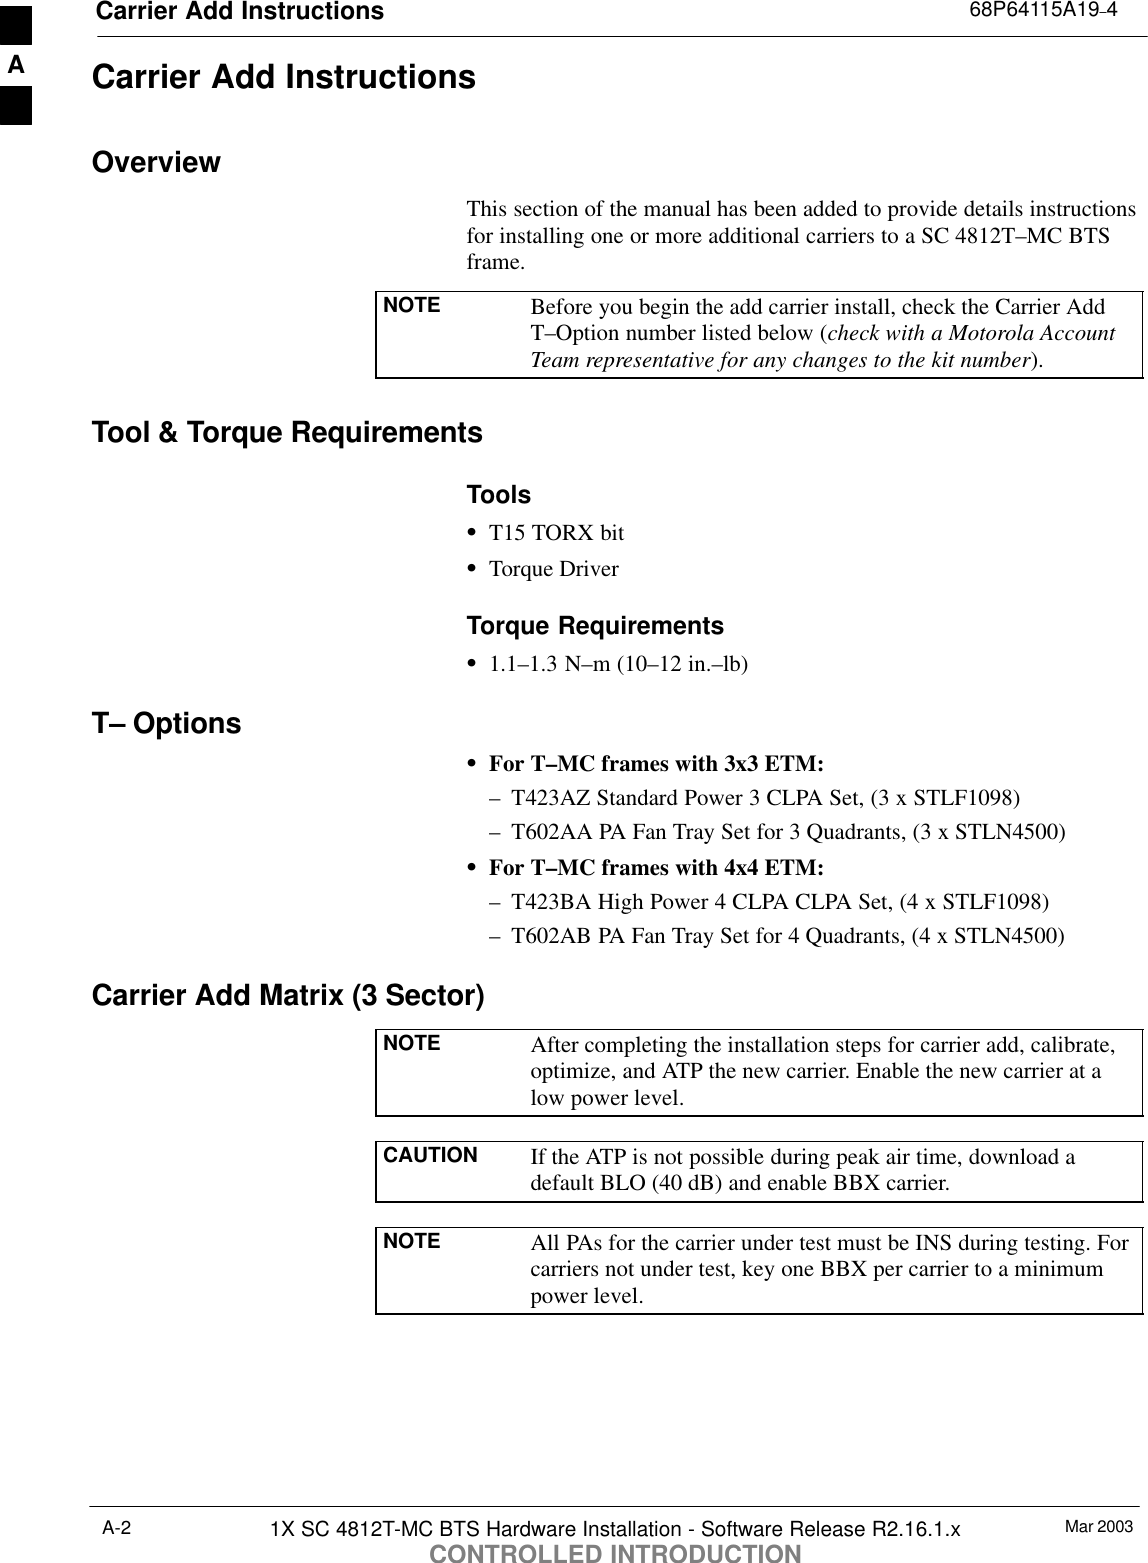 Carrier Add Instructions 68P64115A19–4Mar 20031X SC 4812T-MC BTS Hardware Installation - Software Release R2.16.1.xCONTROLLED INTRODUCTIONA-2Carrier Add InstructionsOverviewThis section of the manual has been added to provide details instructionsfor installing one or more additional carriers to a SC 4812T–MC BTSframe.NOTE Before you begin the add carrier install, check the Carrier AddT–Option number listed below (check with a Motorola AccountTeam representative for any changes to the kit number).Tool &amp; Torque RequirementsToolsST15 TORX bitSTorque DriverTorque RequirementsS1.1–1.3 N–m (10–12 in.–lb)T– OptionsSFor T–MC frames with 3x3 ETM:– T423AZ Standard Power 3 CLPA Set, (3 x STLF1098)– T602AA PA Fan Tray Set for 3 Quadrants, (3 x STLN4500)SFor T–MC frames with 4x4 ETM:– T423BA High Power 4 CLPA CLPA Set, (4 x STLF1098)– T602AB PA Fan Tray Set for 4 Quadrants, (4 x STLN4500)Carrier Add Matrix (3 Sector)NOTE After completing the installation steps for carrier add, calibrate,optimize, and ATP the new carrier. Enable the new carrier at alow power level.CAUTION If the ATP is not possible during peak air time, download adefault BLO (40 dB) and enable BBX carrier.NOTE All PAs for the carrier under test must be INS during testing. Forcarriers not under test, key one BBX per carrier to a minimumpower level.A